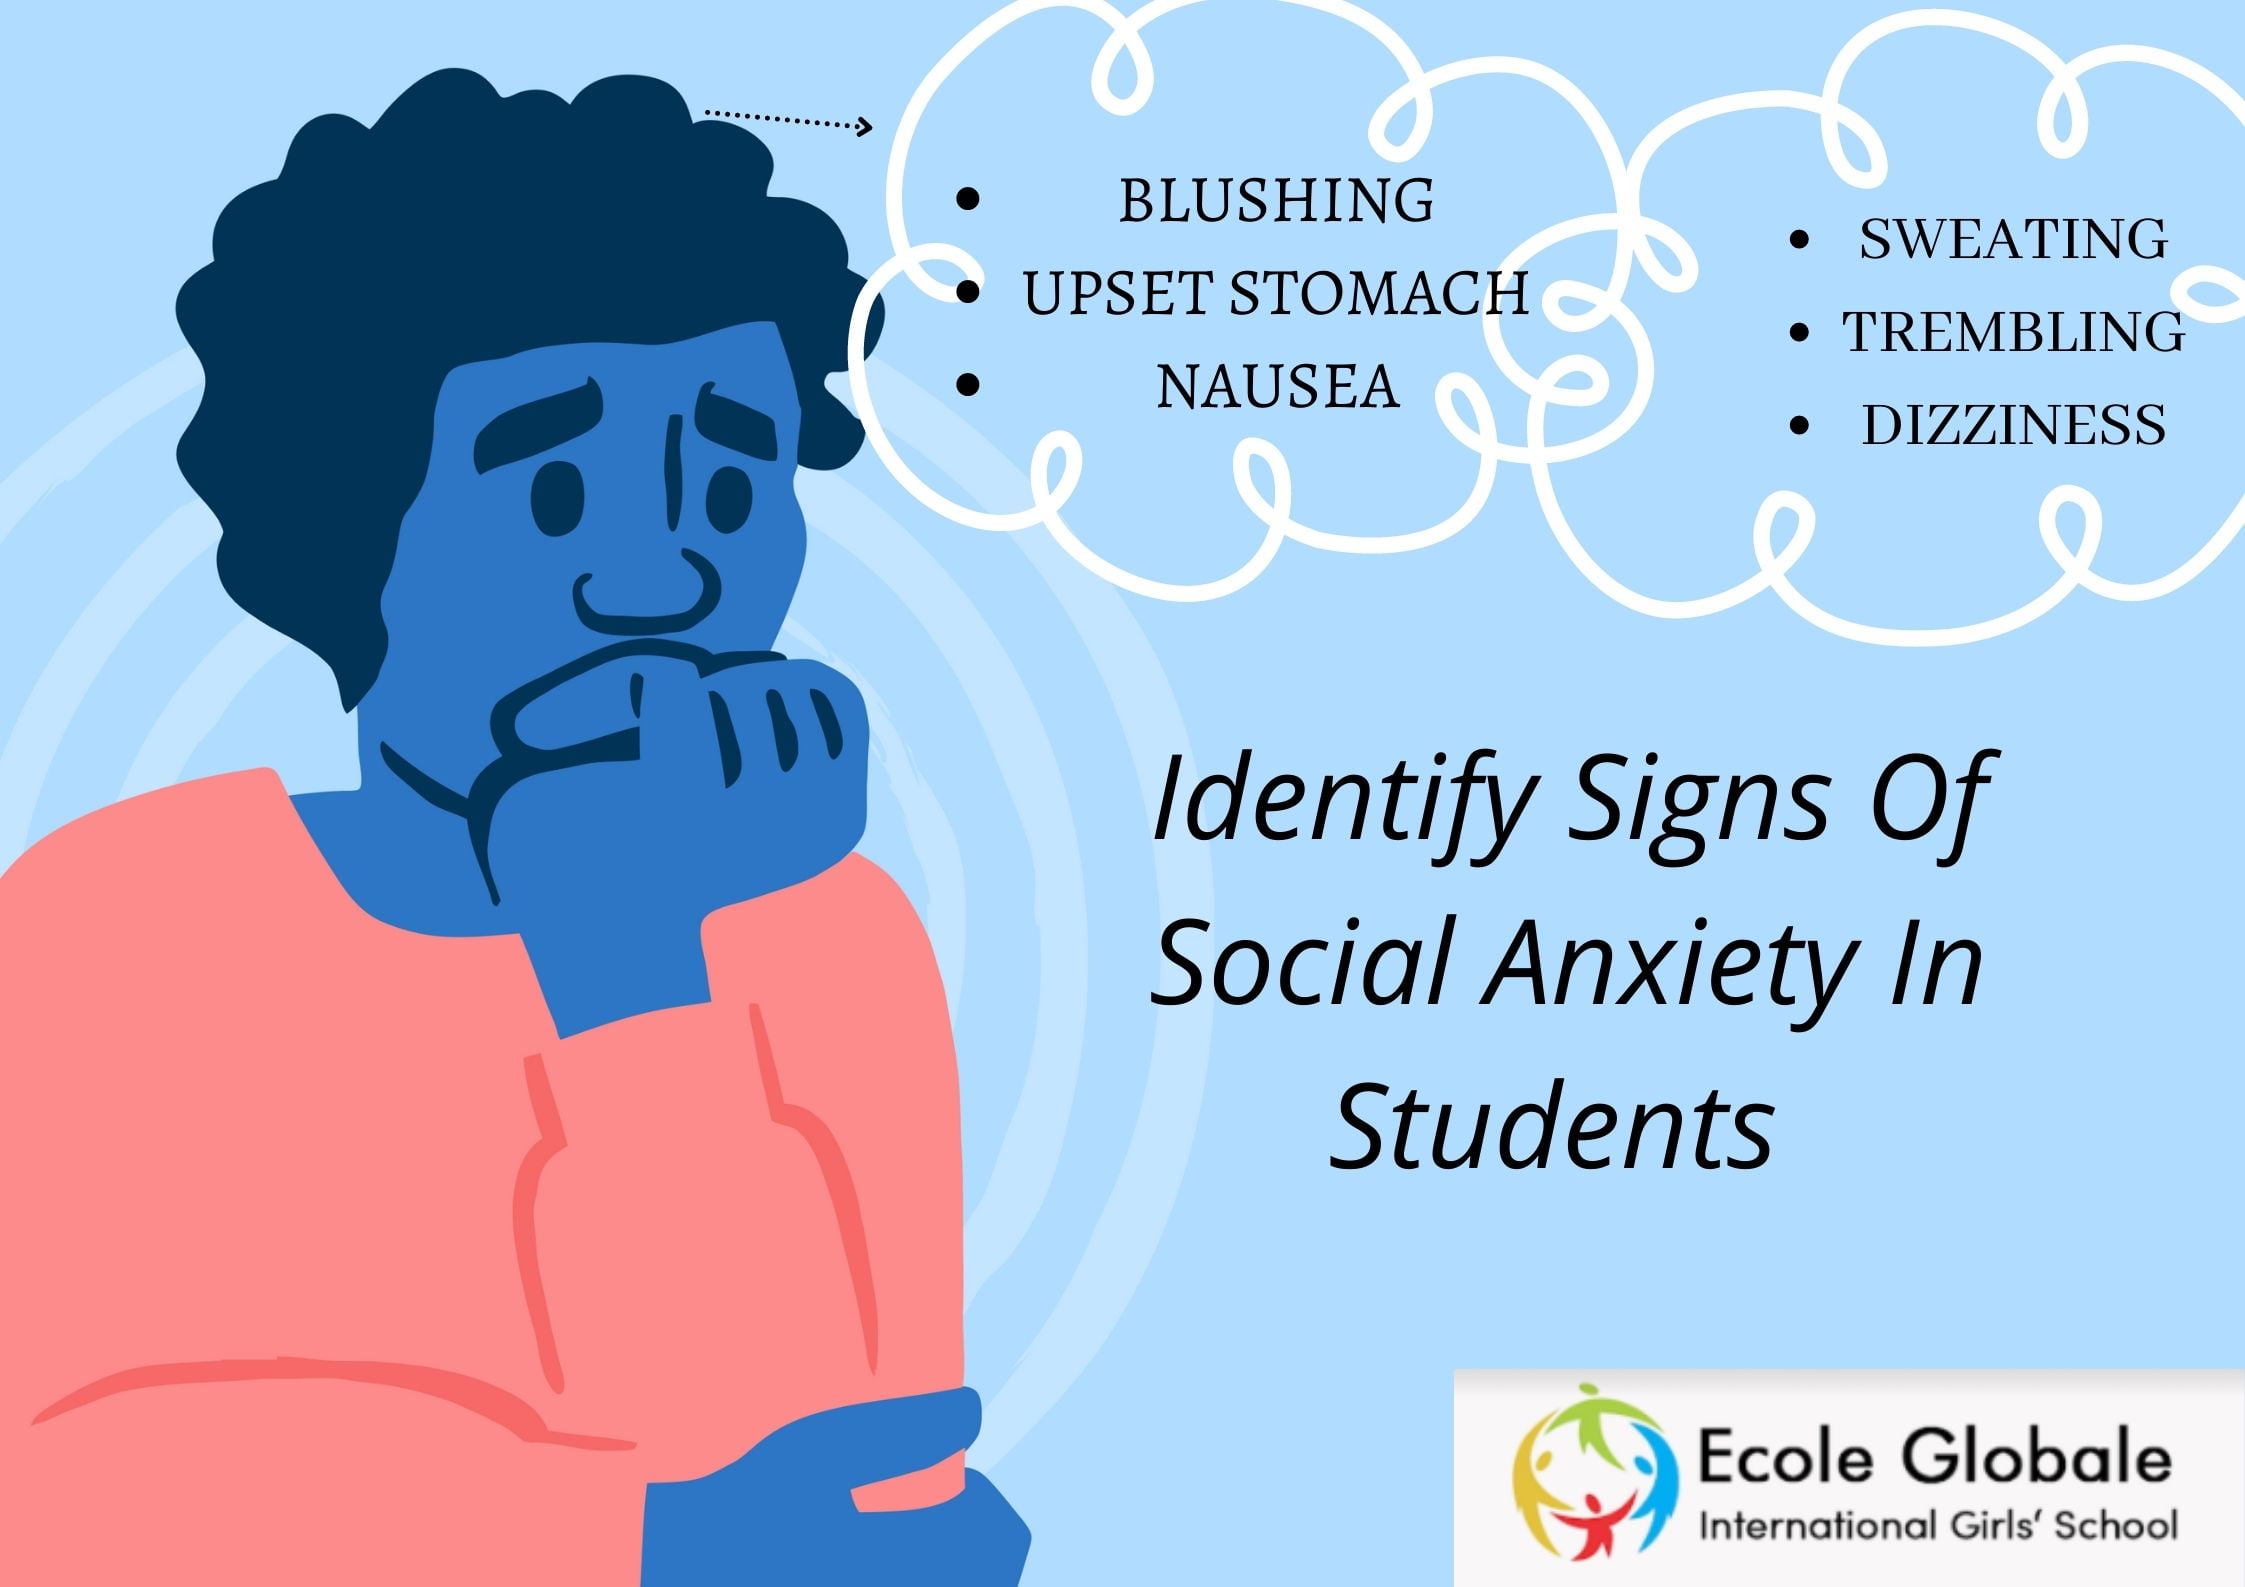 How To Identify Signs Of Social Anxiety In Students And Help Them